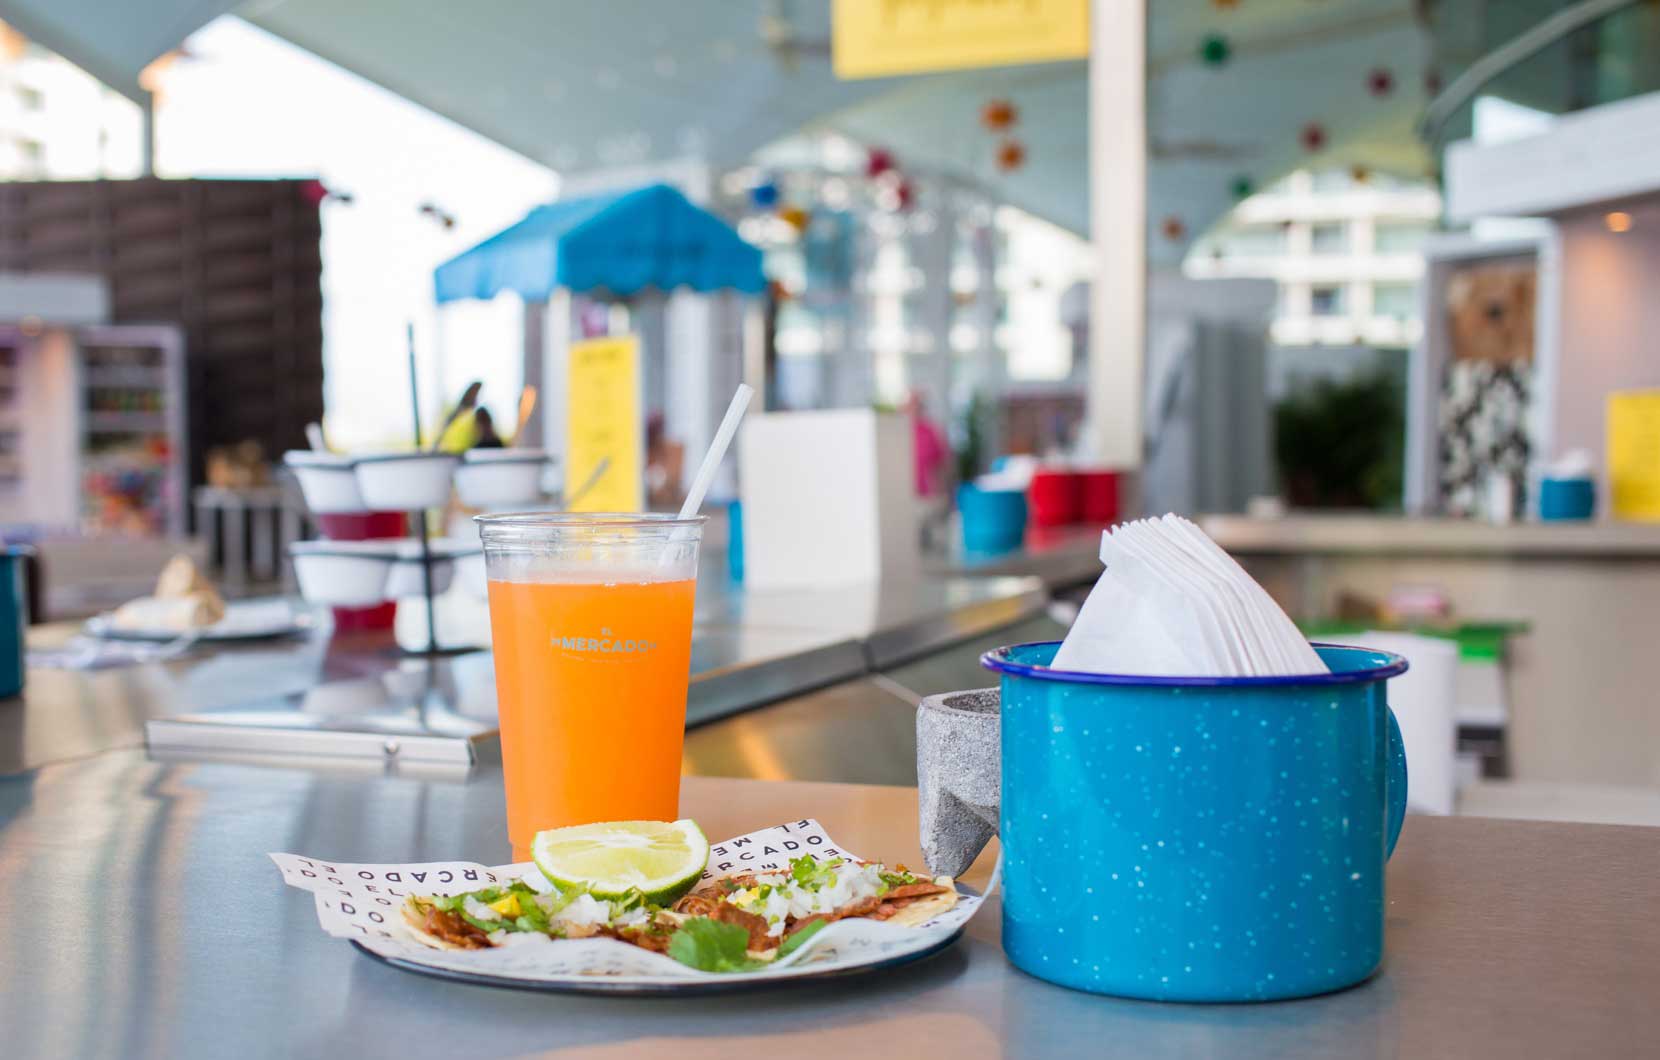 Guests can sit at the counter and enjoy their tacos with an aguas fresca and other Mexican street food.